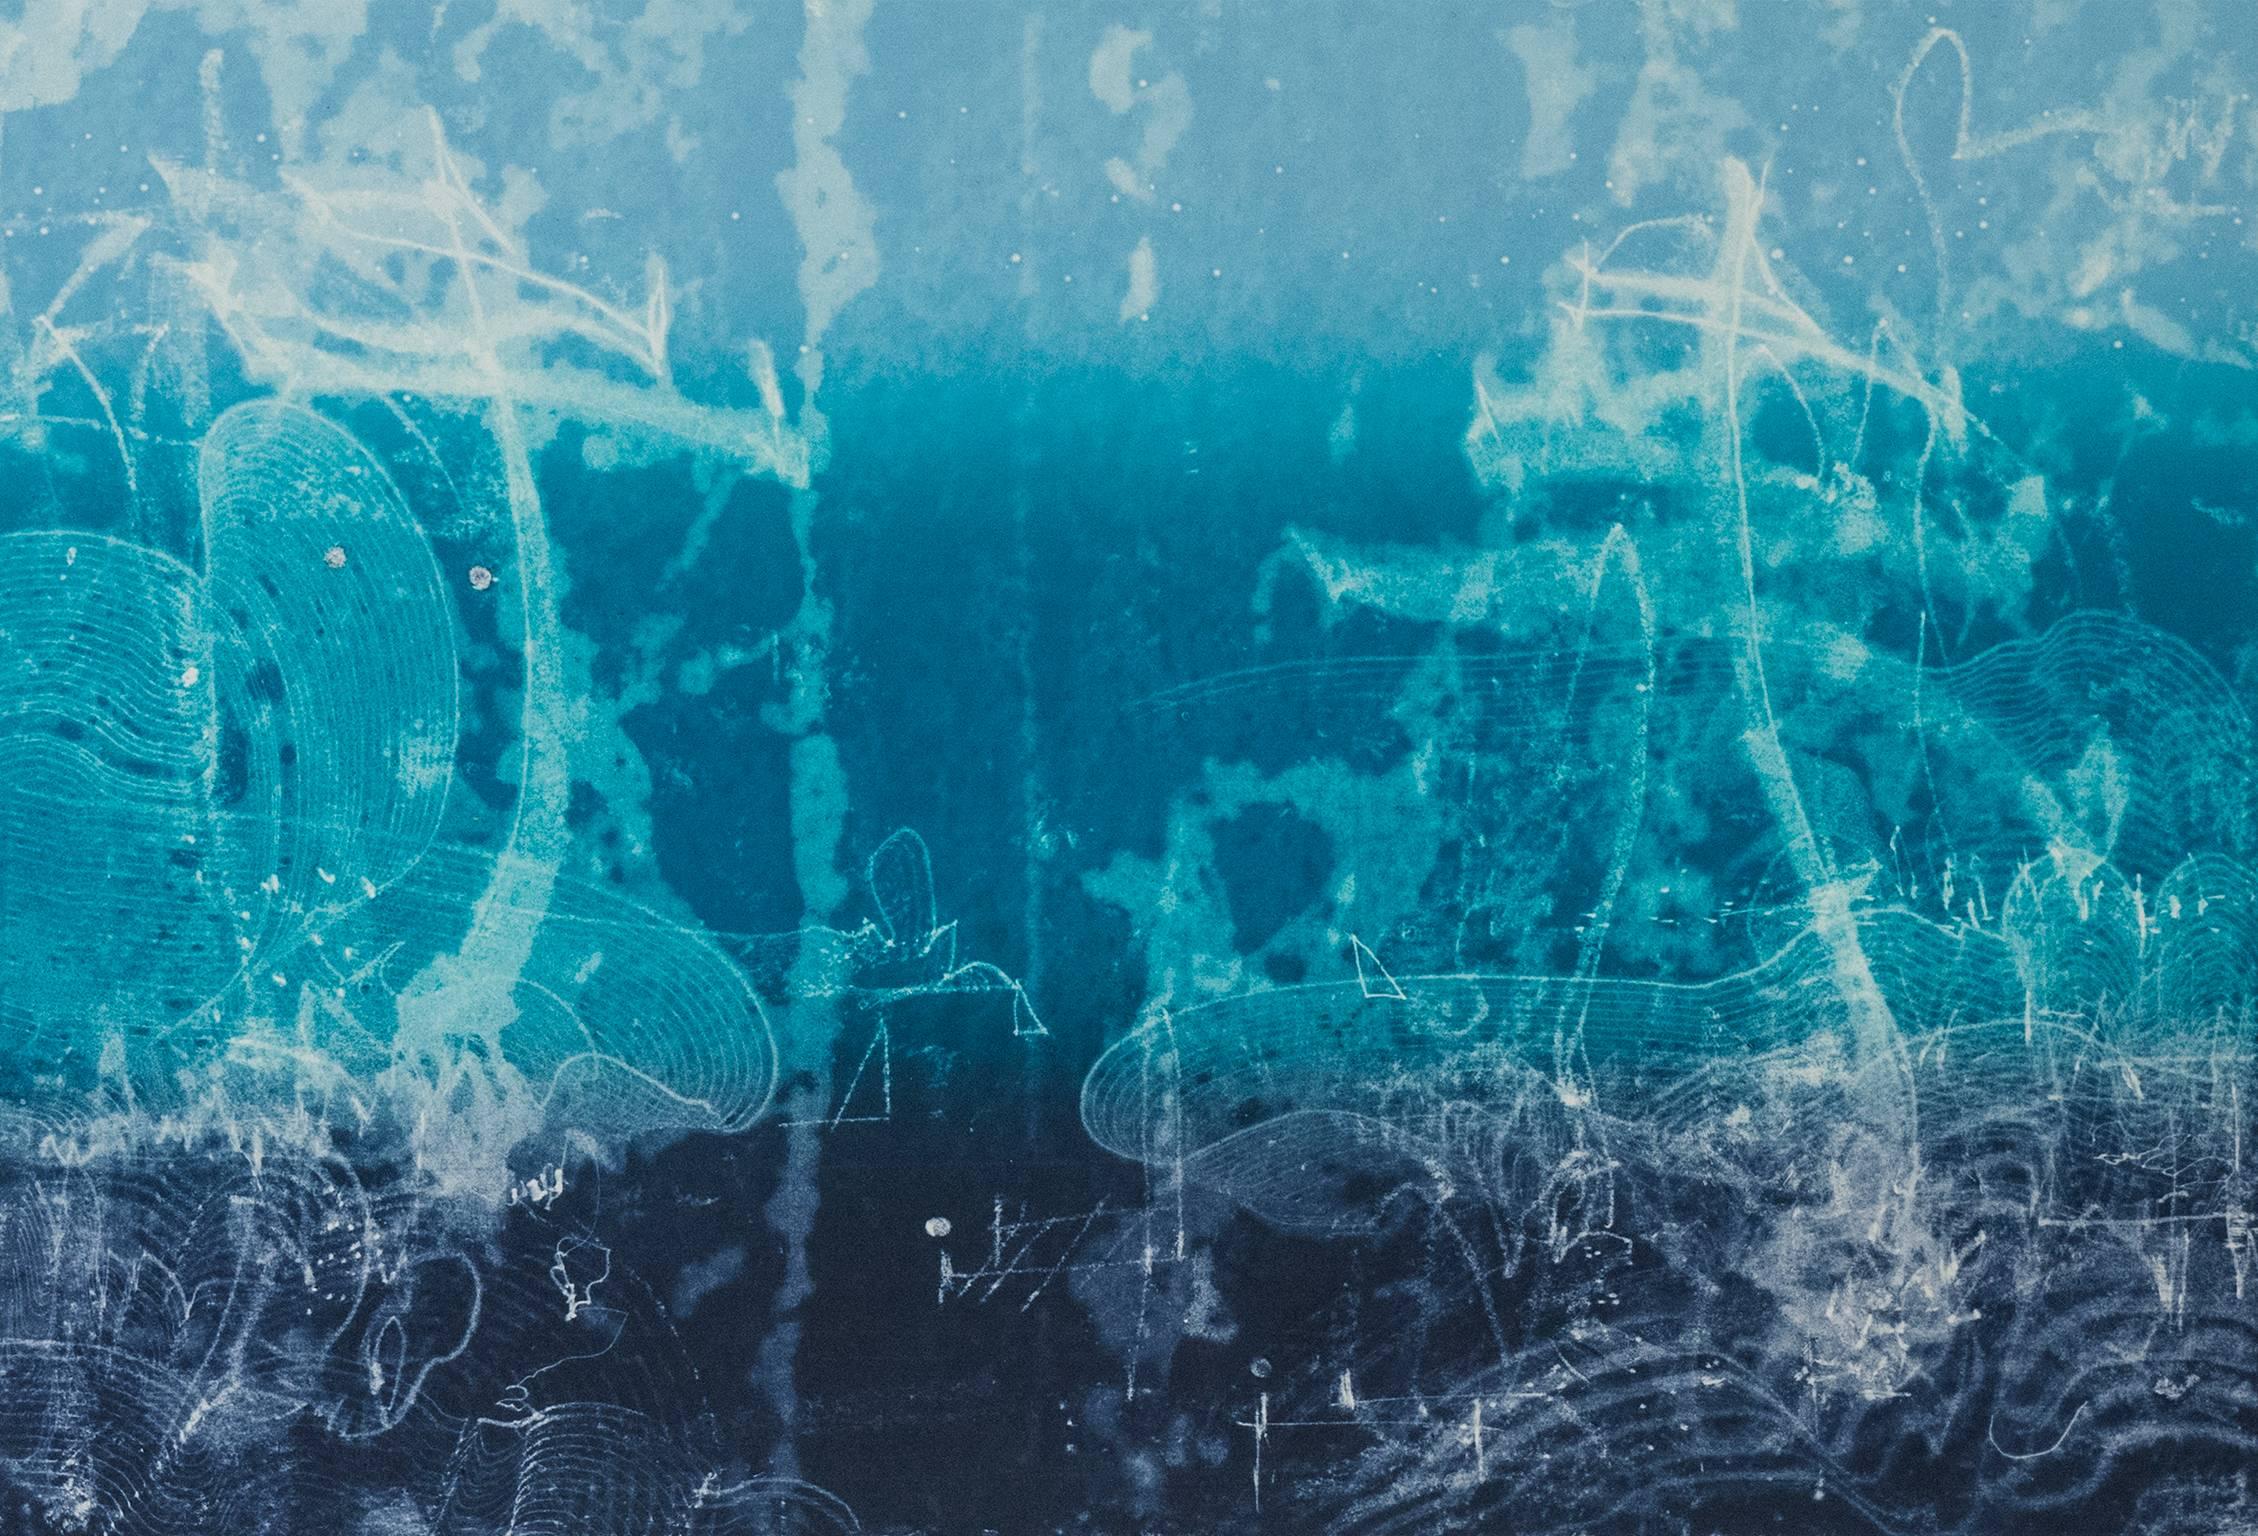 Nancy Lasar Landscape Print - "Catch The Wind Two”, abstract seascape monoprint, shades of blue, turquoise.